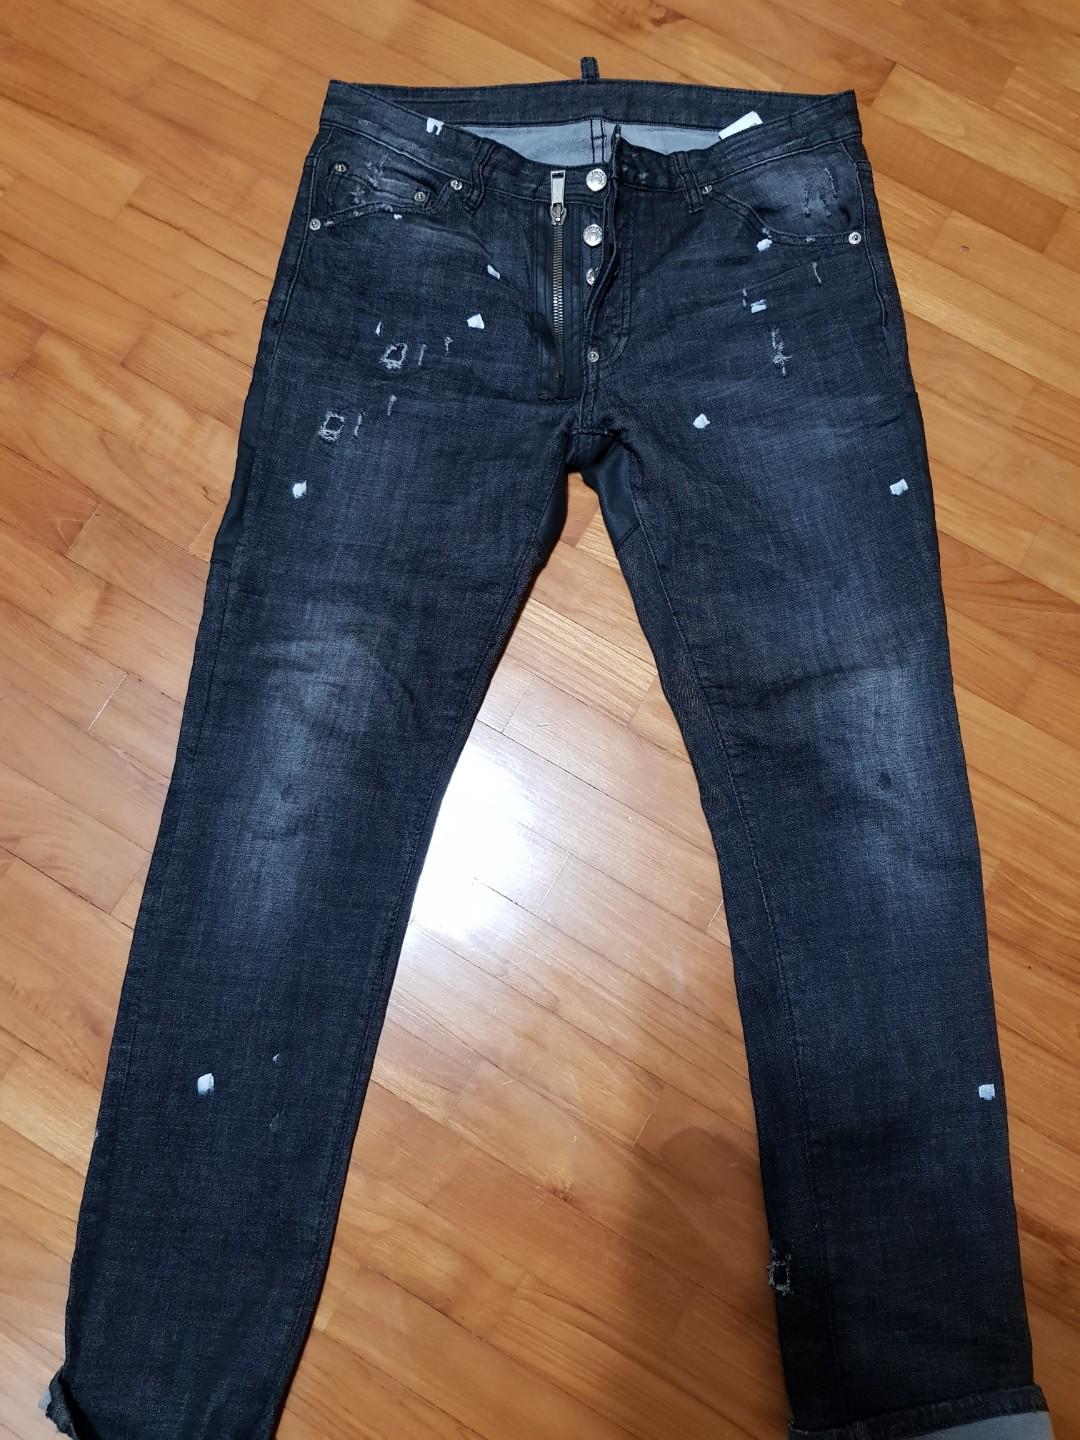 Dsquared jeans (Price reduced), Men's 